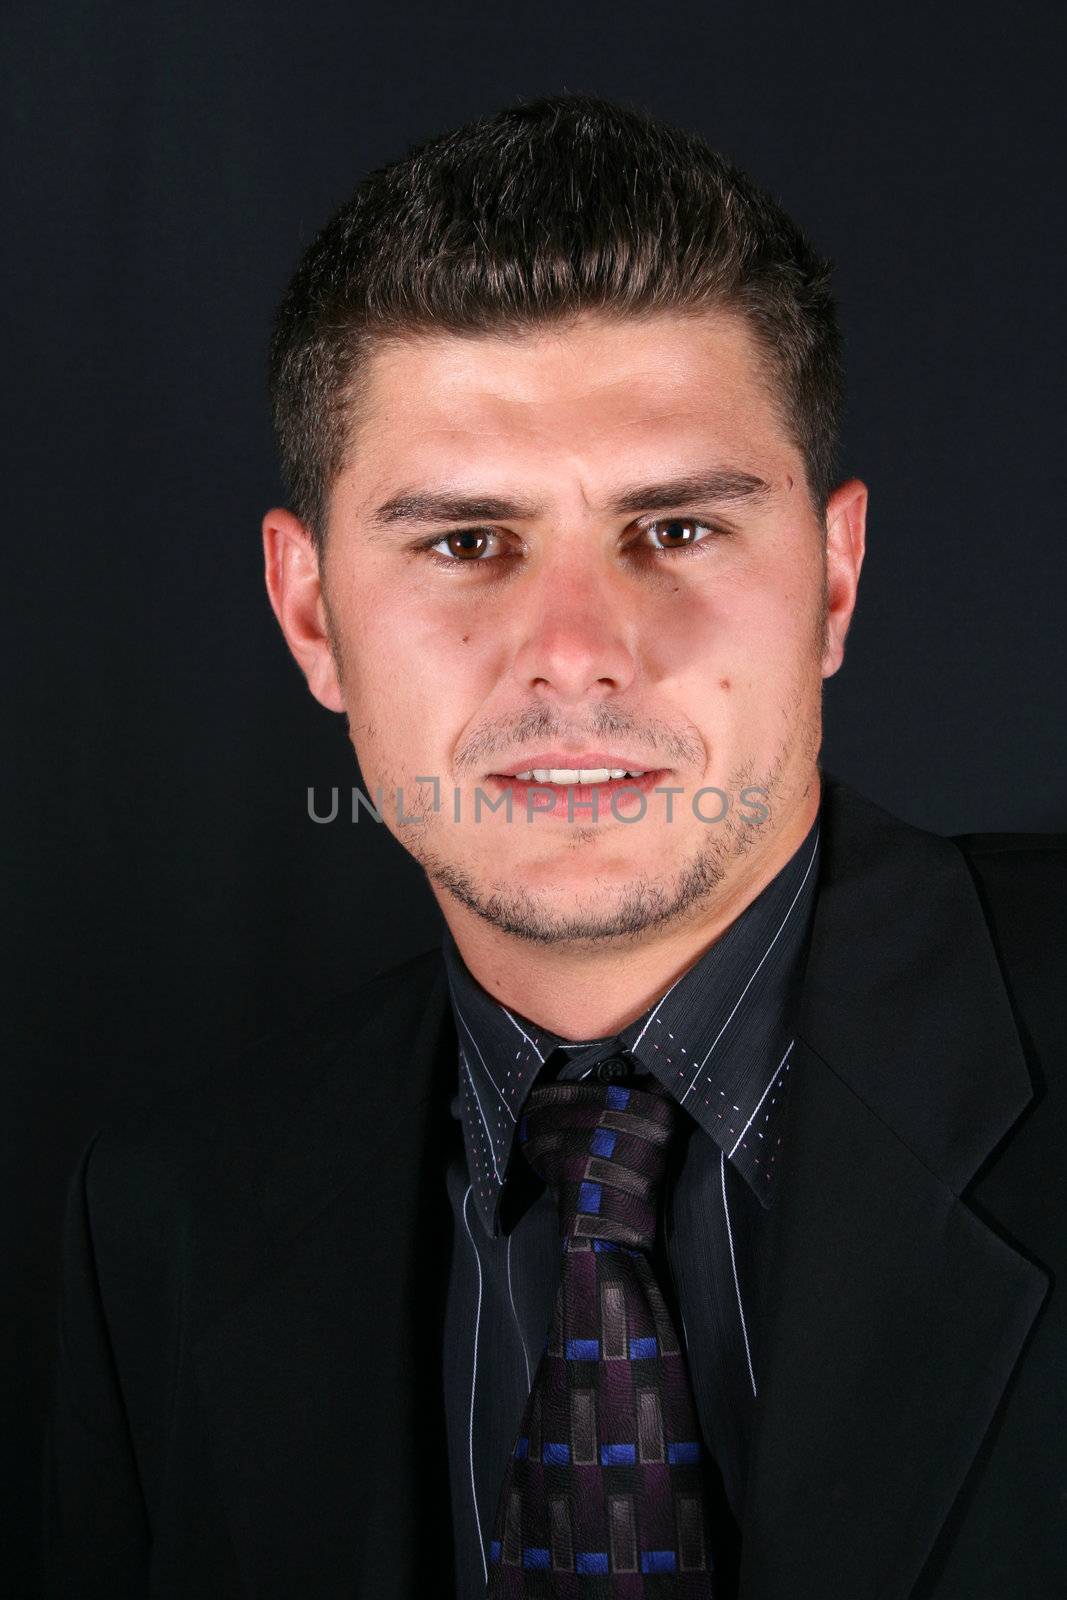 Male model in a suit and tie against a dark background